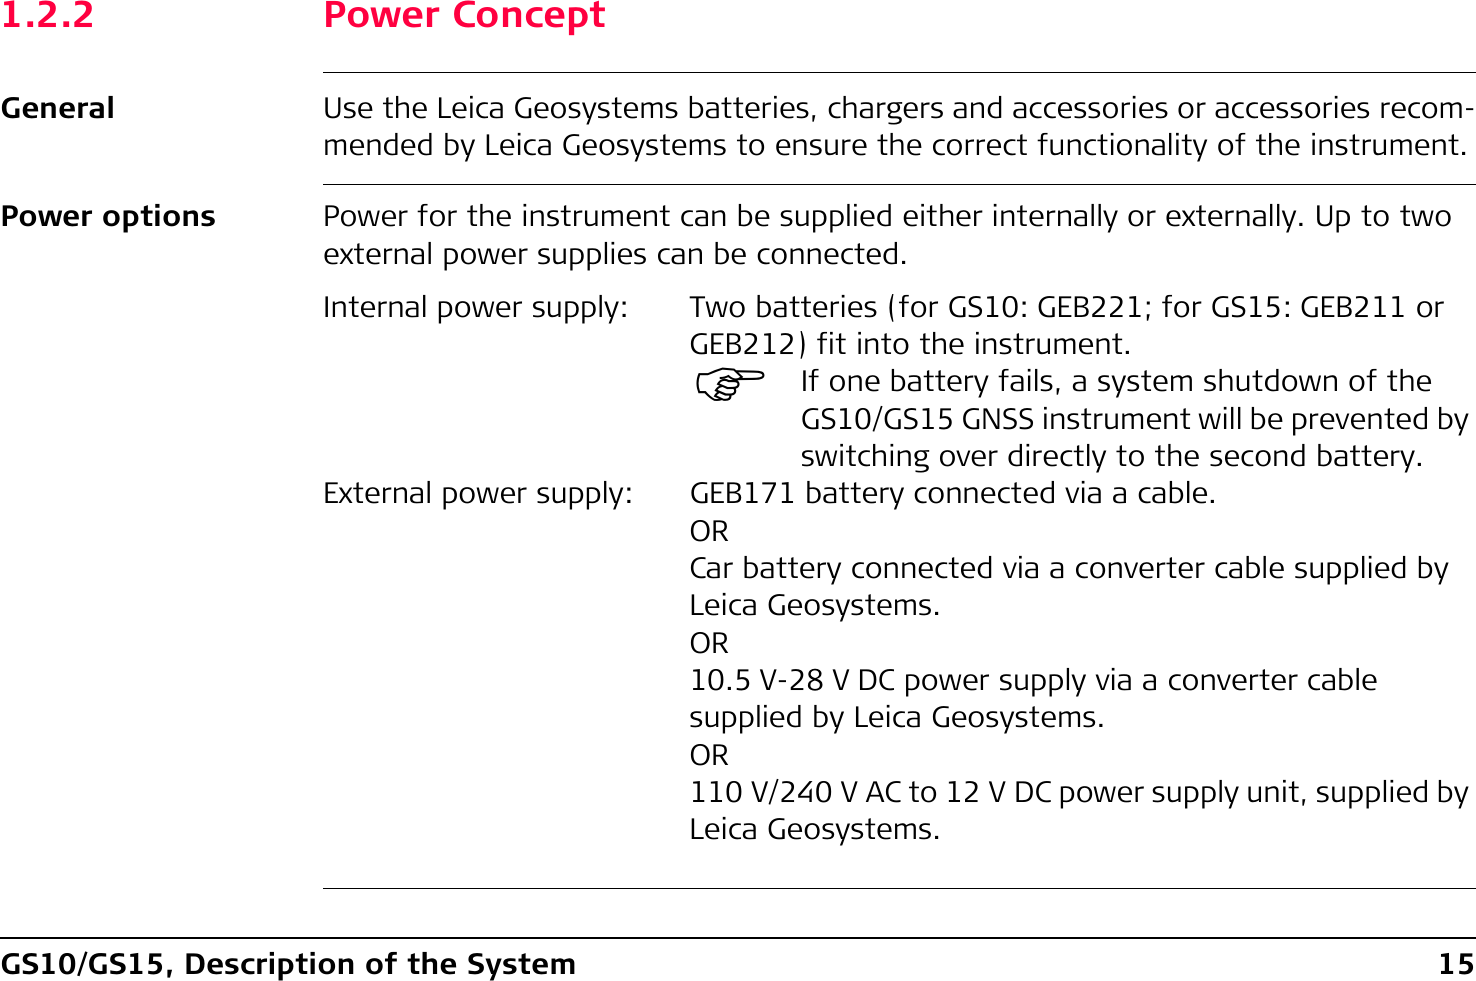 GS10/GS15, Description of the System 151.2.2 Power ConceptGeneral Use the Leica Geosystems batteries, chargers and accessories or accessories recom-mended by Leica Geosystems to ensure the correct functionality of the instrument.Power options Power for the instrument can be supplied either internally or externally. Up to two external power supplies can be connected.Internal power supply: Two batteries (for GS10: GEB221; for GS15: GEB211 or GEB212) fit into the instrument.)If one battery fails, a system shutdown of the GS10/GS15 GNSS instrument will be prevented by switching over directly to the second battery.External power supply: GEB171 battery connected via a cable.ORCar battery connected via a converter cable supplied by Leica Geosystems.OR10.5 V-28 V DC power supply via a converter cable supplied by Leica Geosystems.OR110 V/240 V AC to 12 V DC power supply unit, supplied by Leica Geosystems.